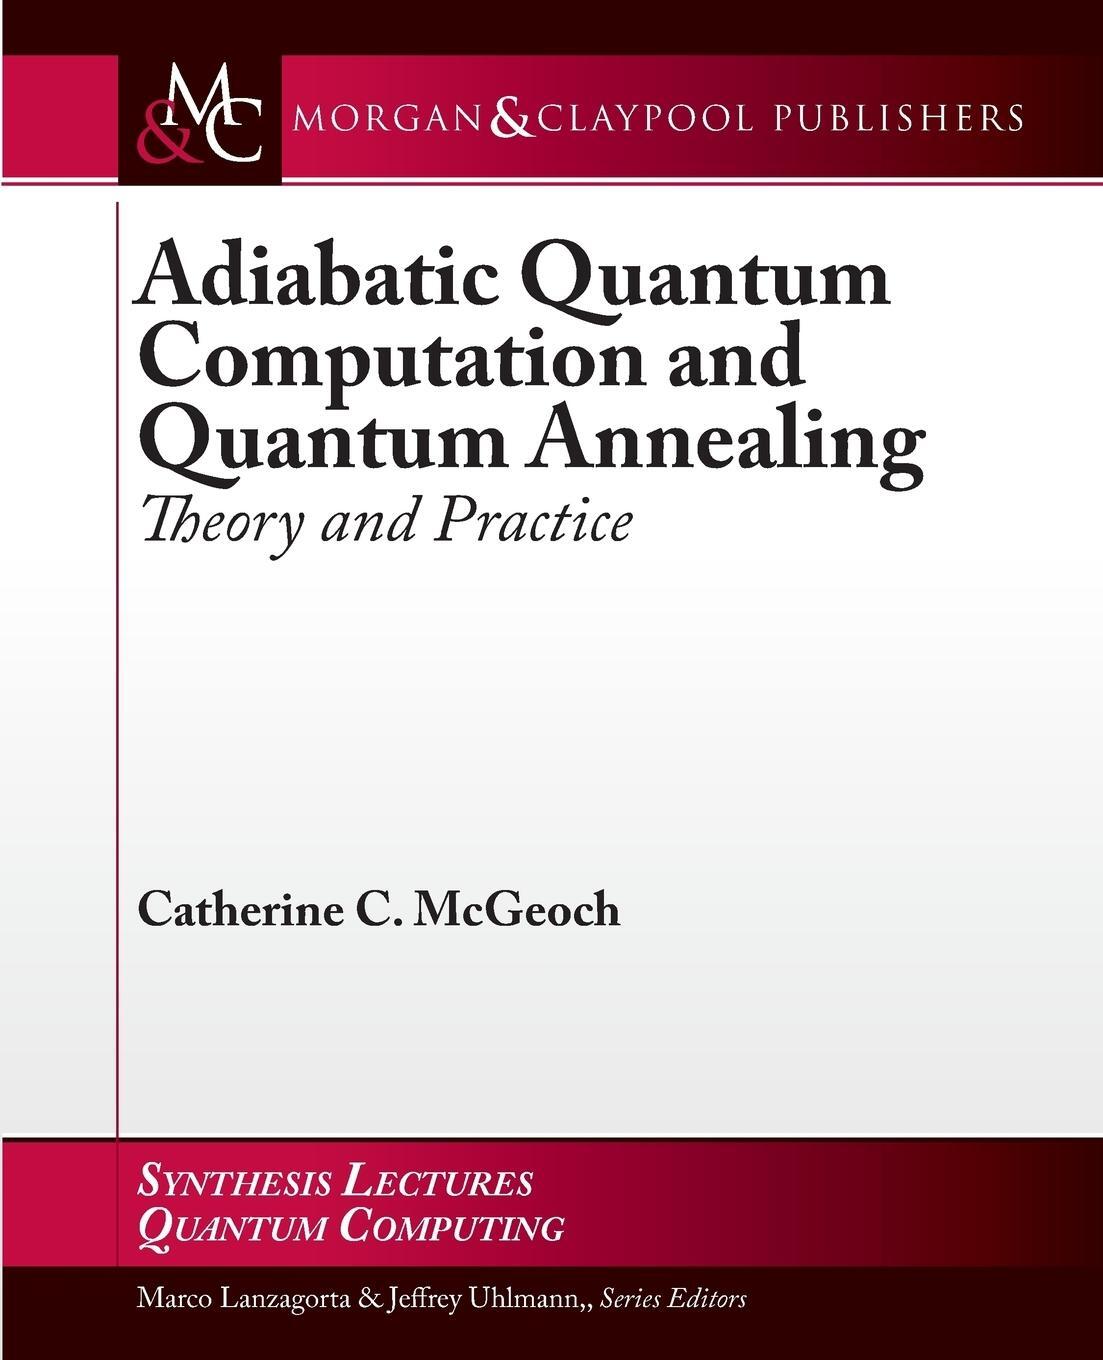 Cover: 9781627055925 | ADIABATIC QUANTUM COMPUTATION | Theory and Practice | McGeoch | 2014